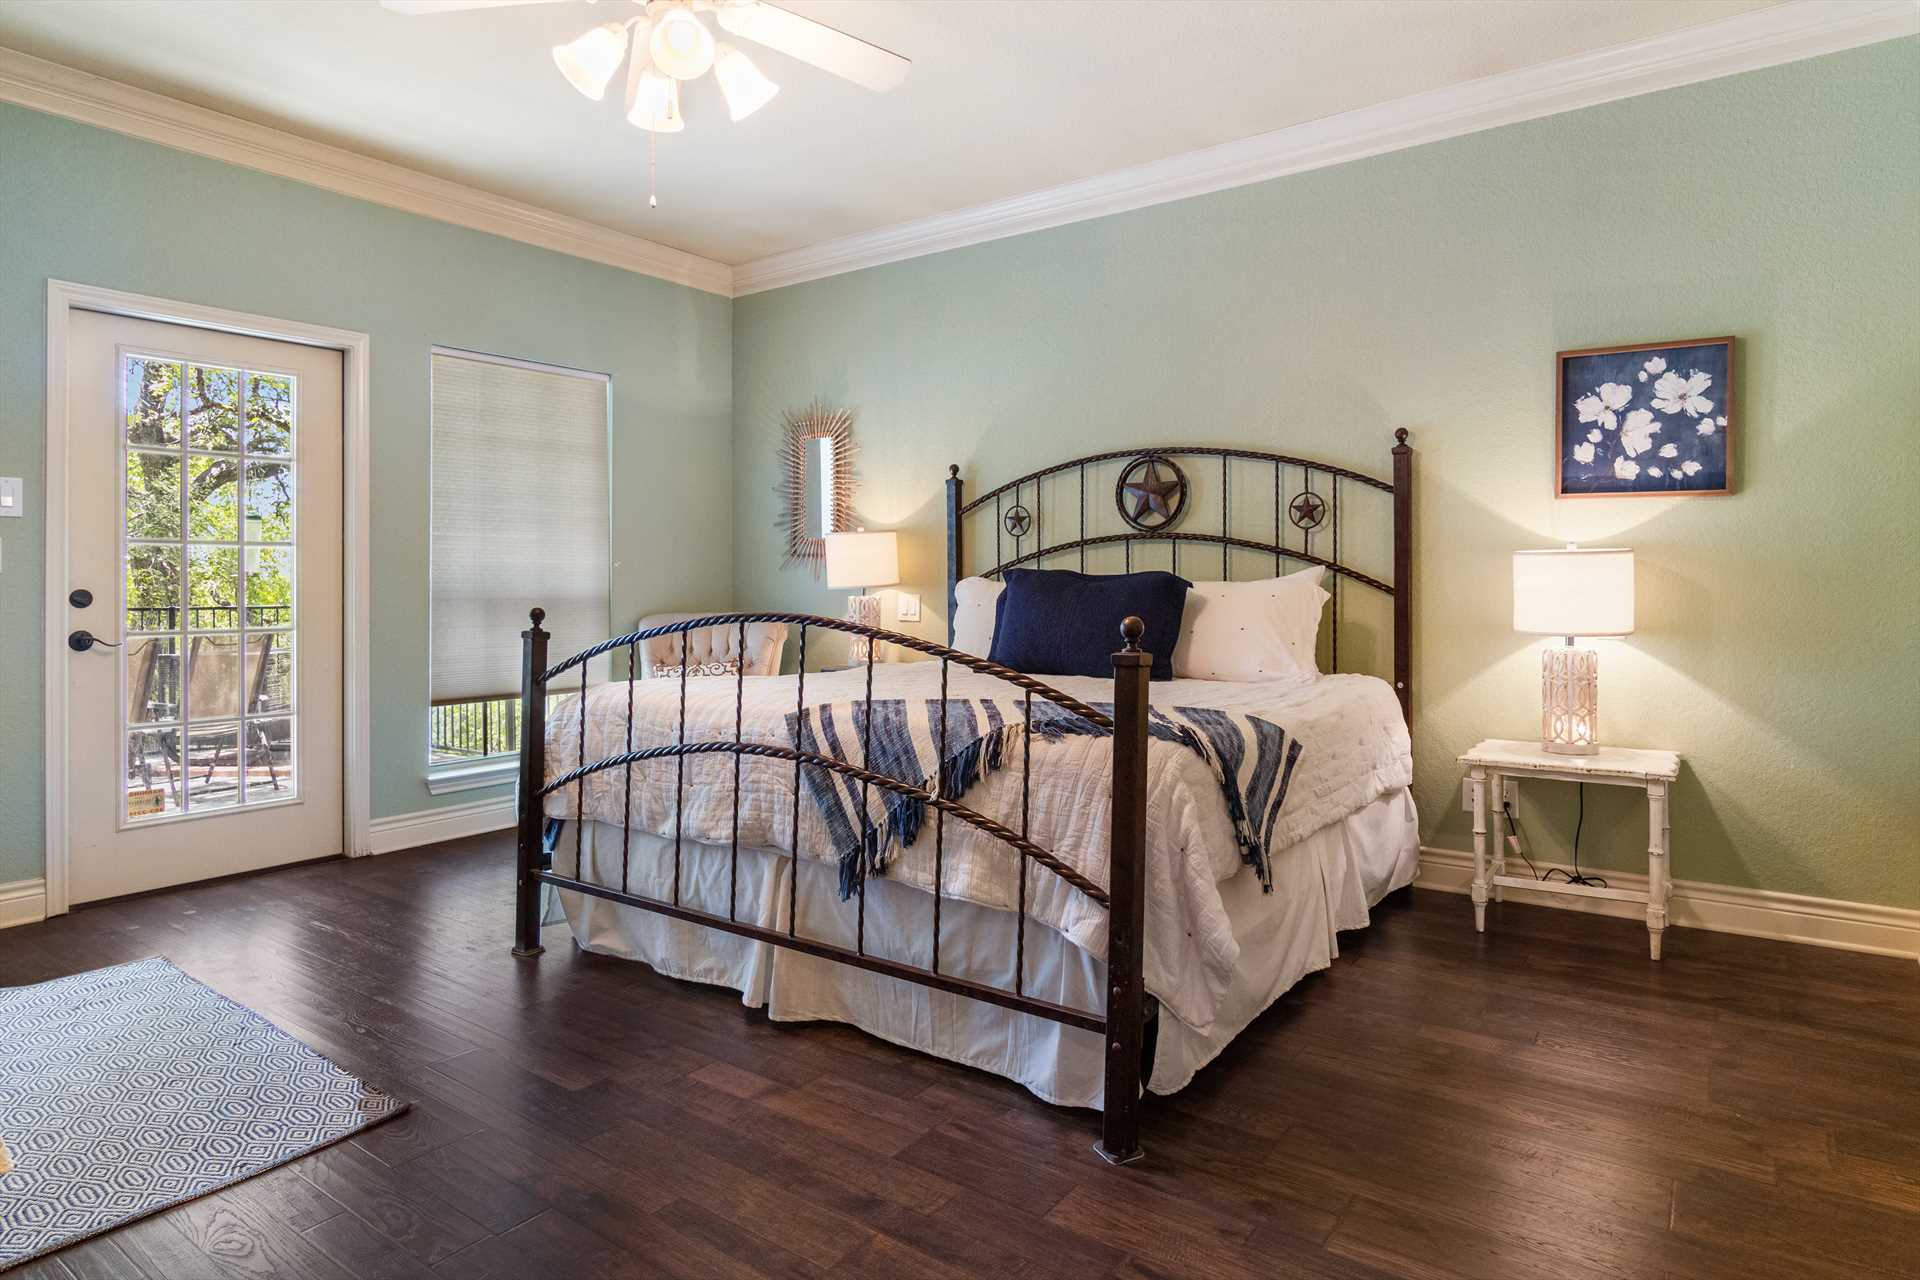                                                 A plush and comfy king-sized bed, draped in clean linens, can be found in the master bedroom, along with a day bed.